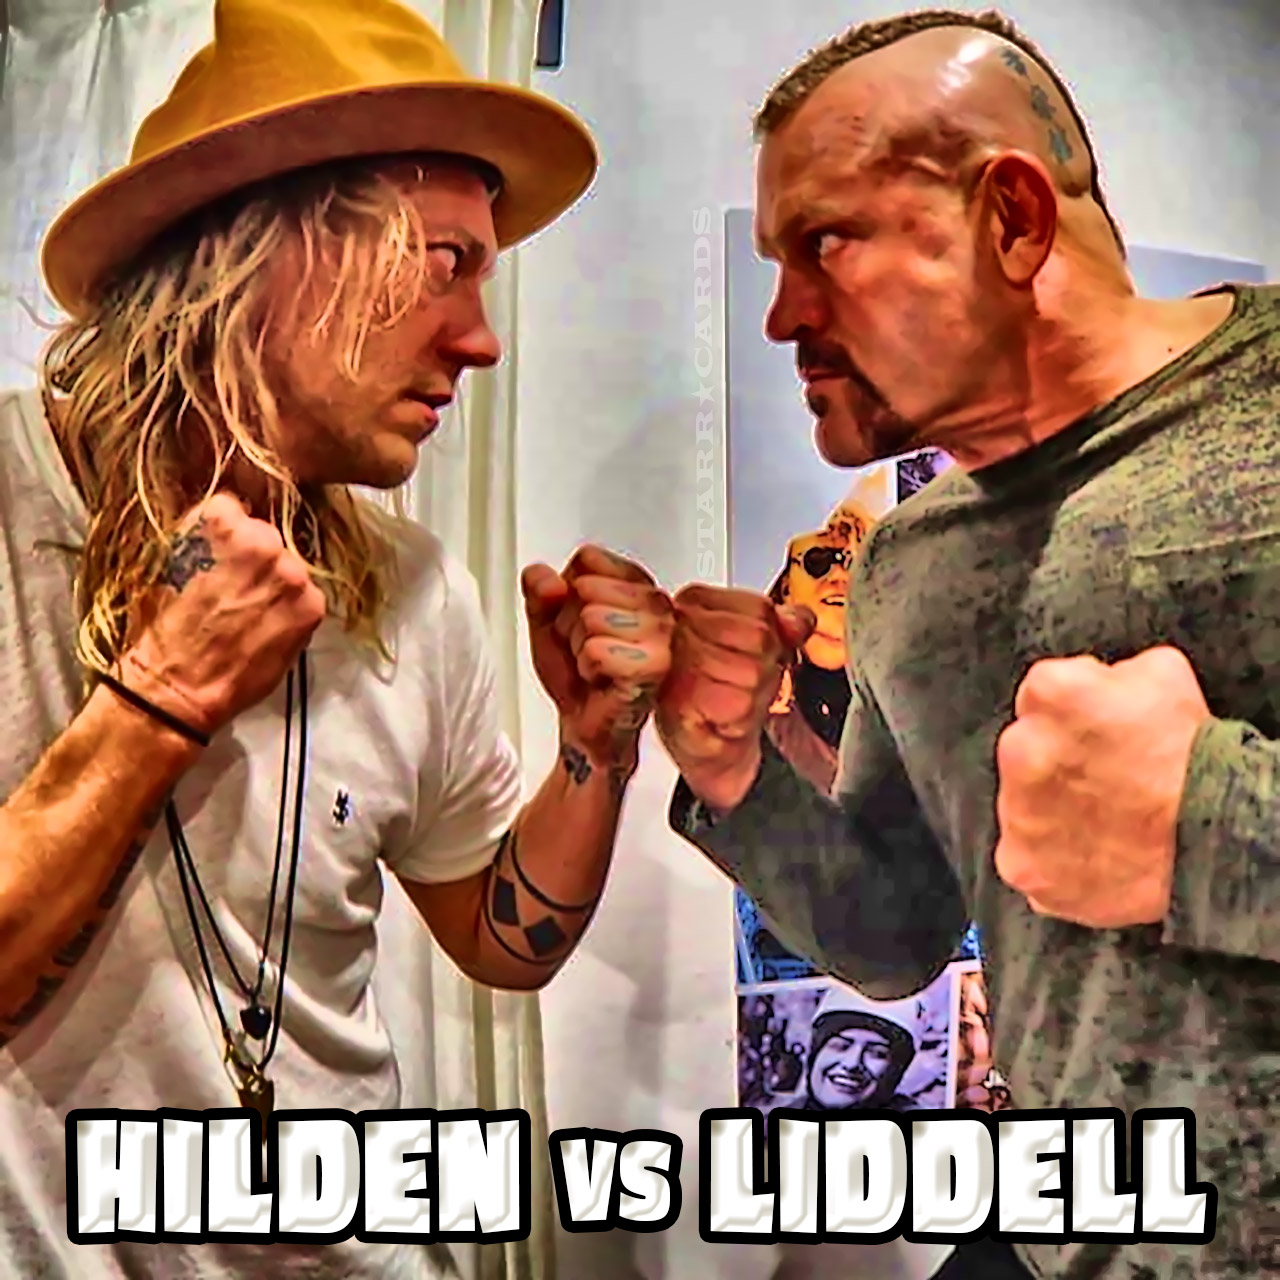 Watch Jukka Hilden get punched in slo-mo by MMA legend Chuck Liddell